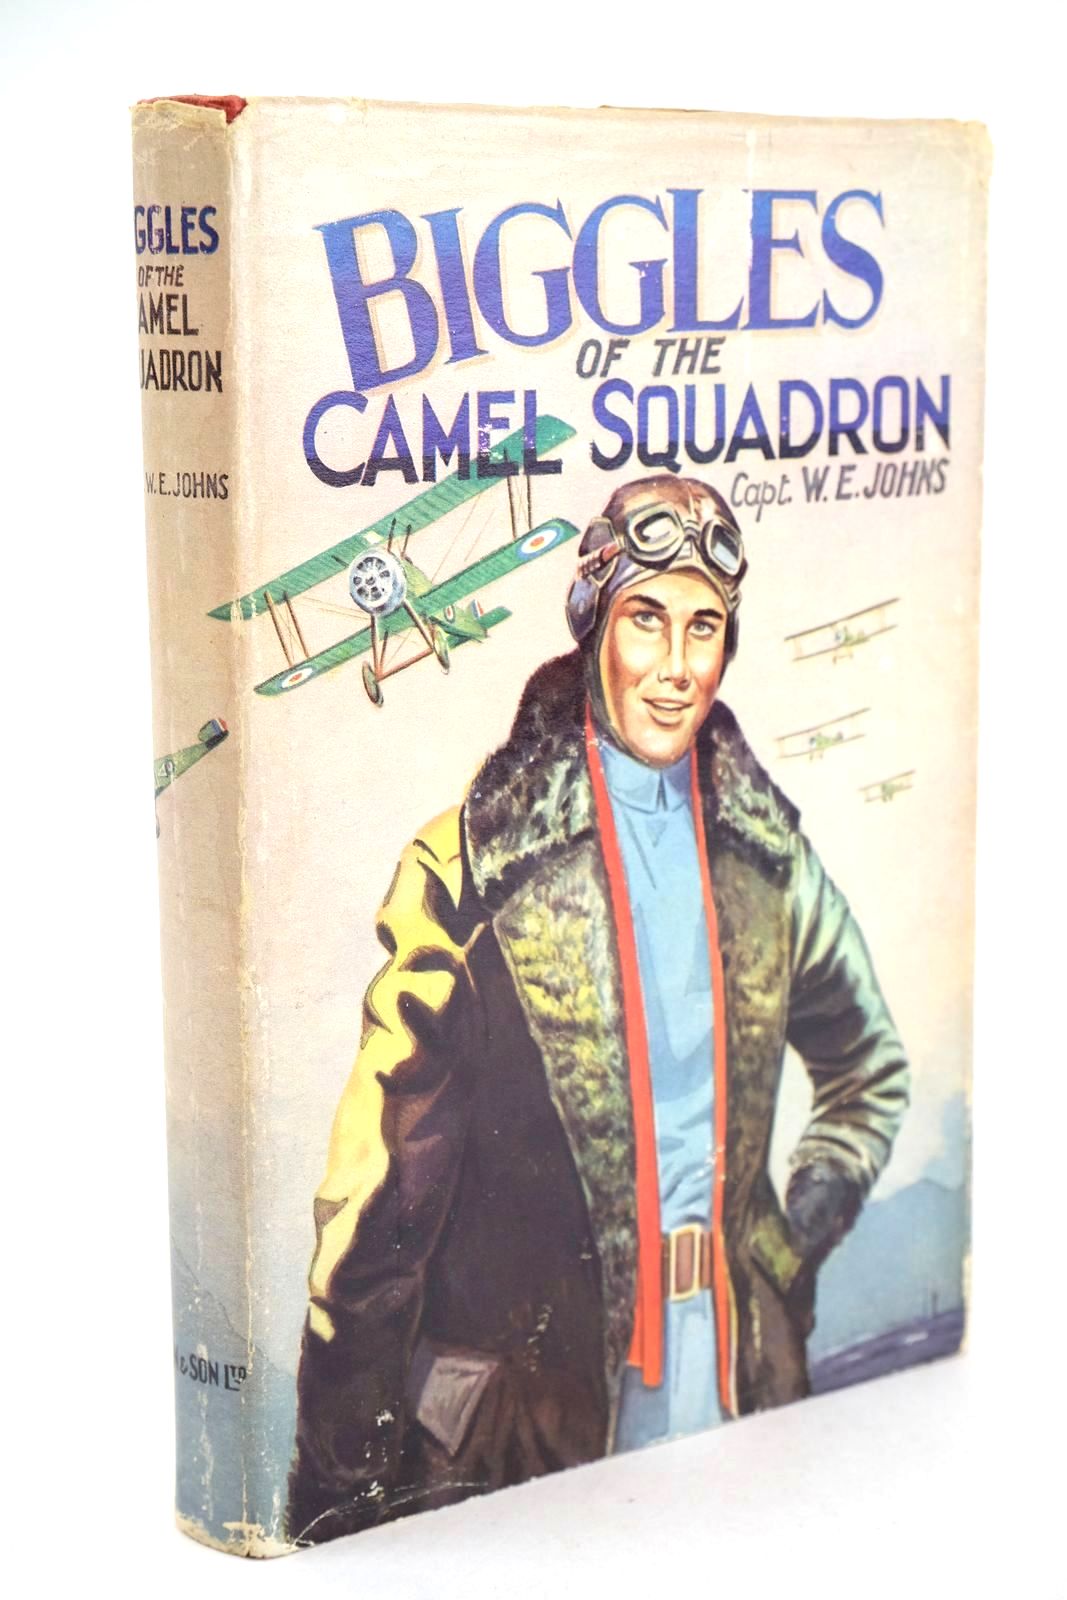 Photo of BIGGLES OF THE CAMEL SQUADRON written by Johns, W.E. published by Dean &amp; Son Ltd. (STOCK CODE: 1326069)  for sale by Stella & Rose's Books